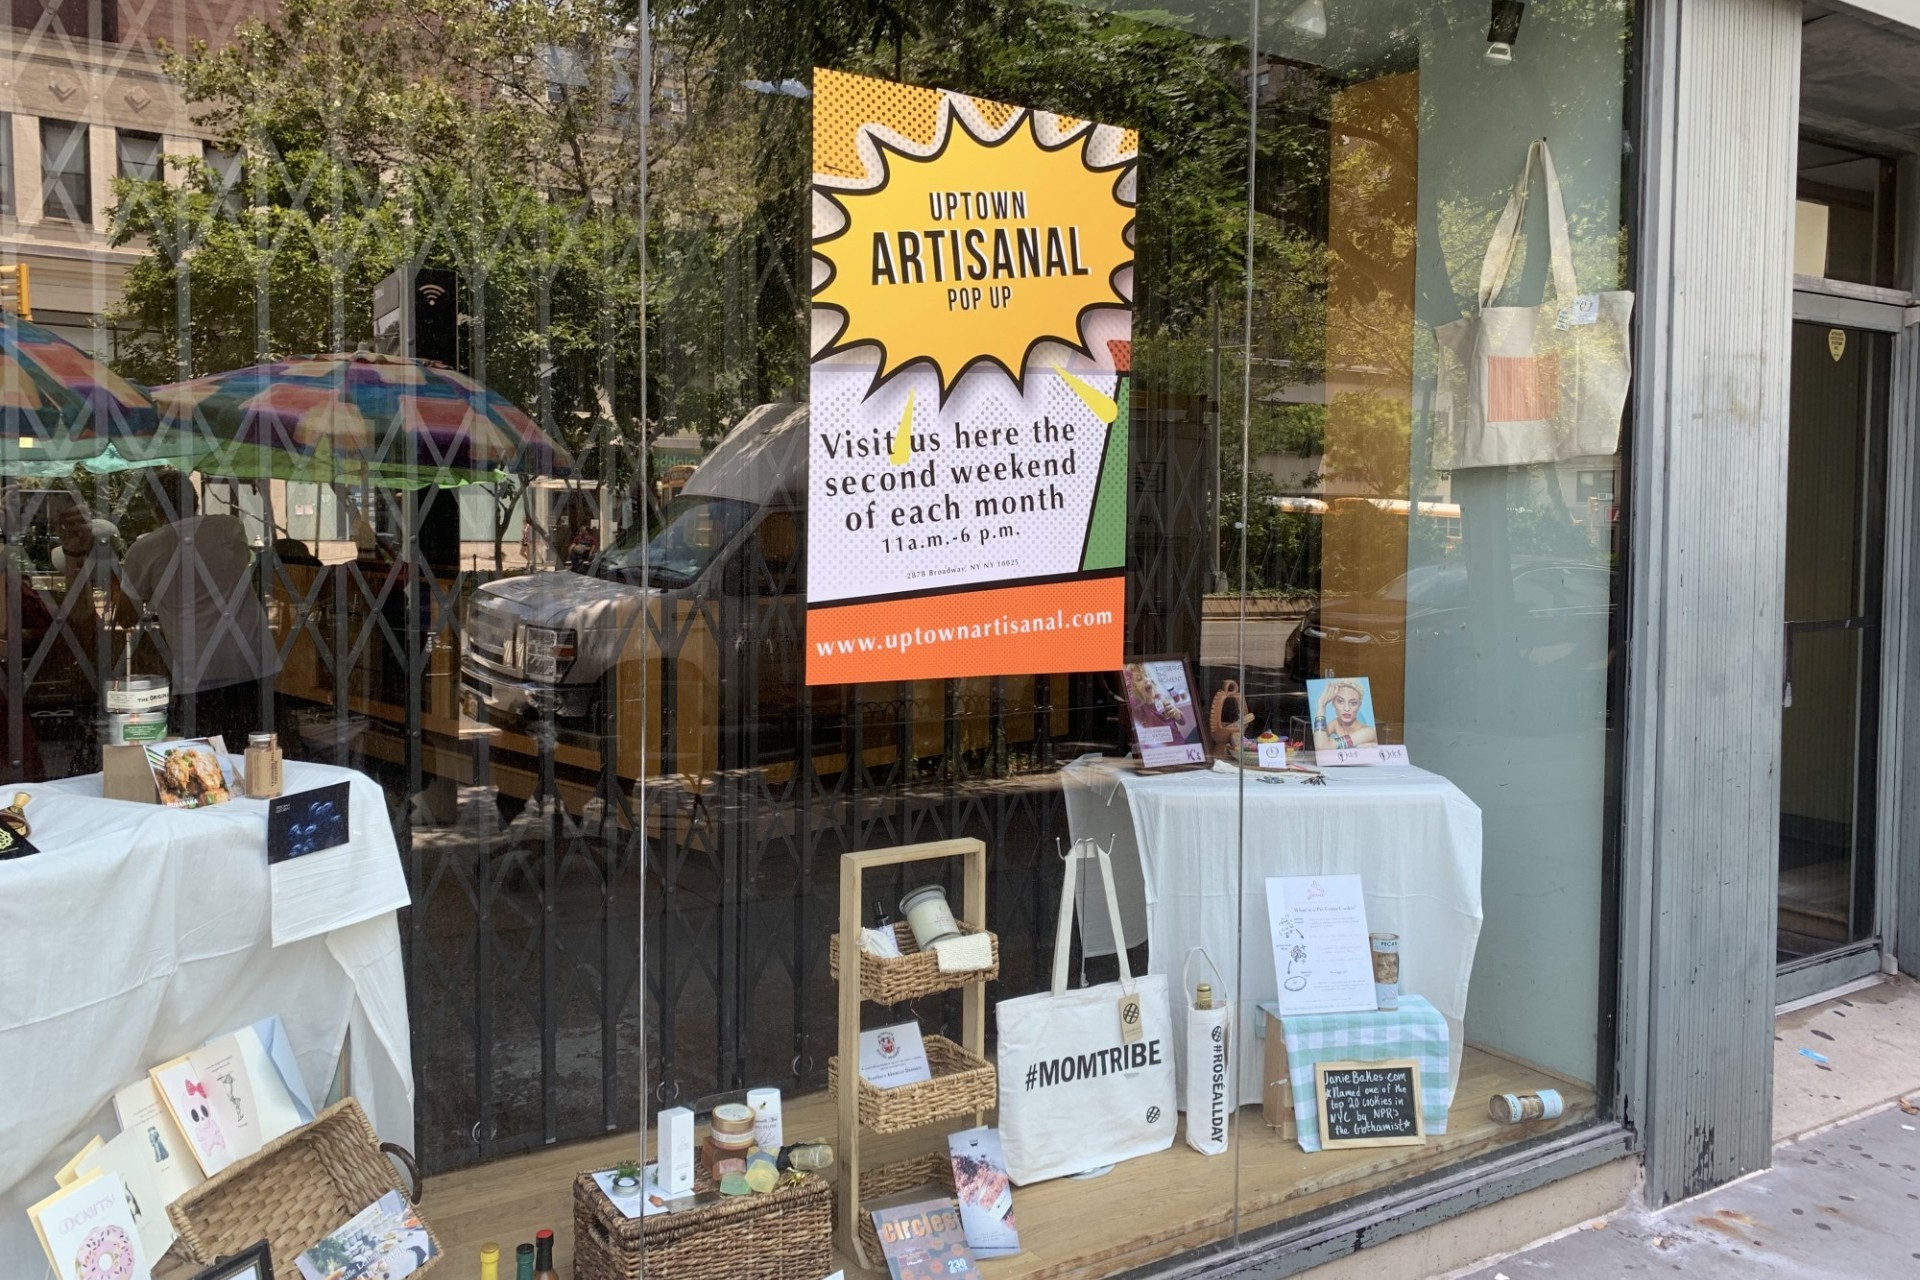 A storefront for the Uptown Artisanal pop-up market, which has a flyer and a sampling of items in the window.